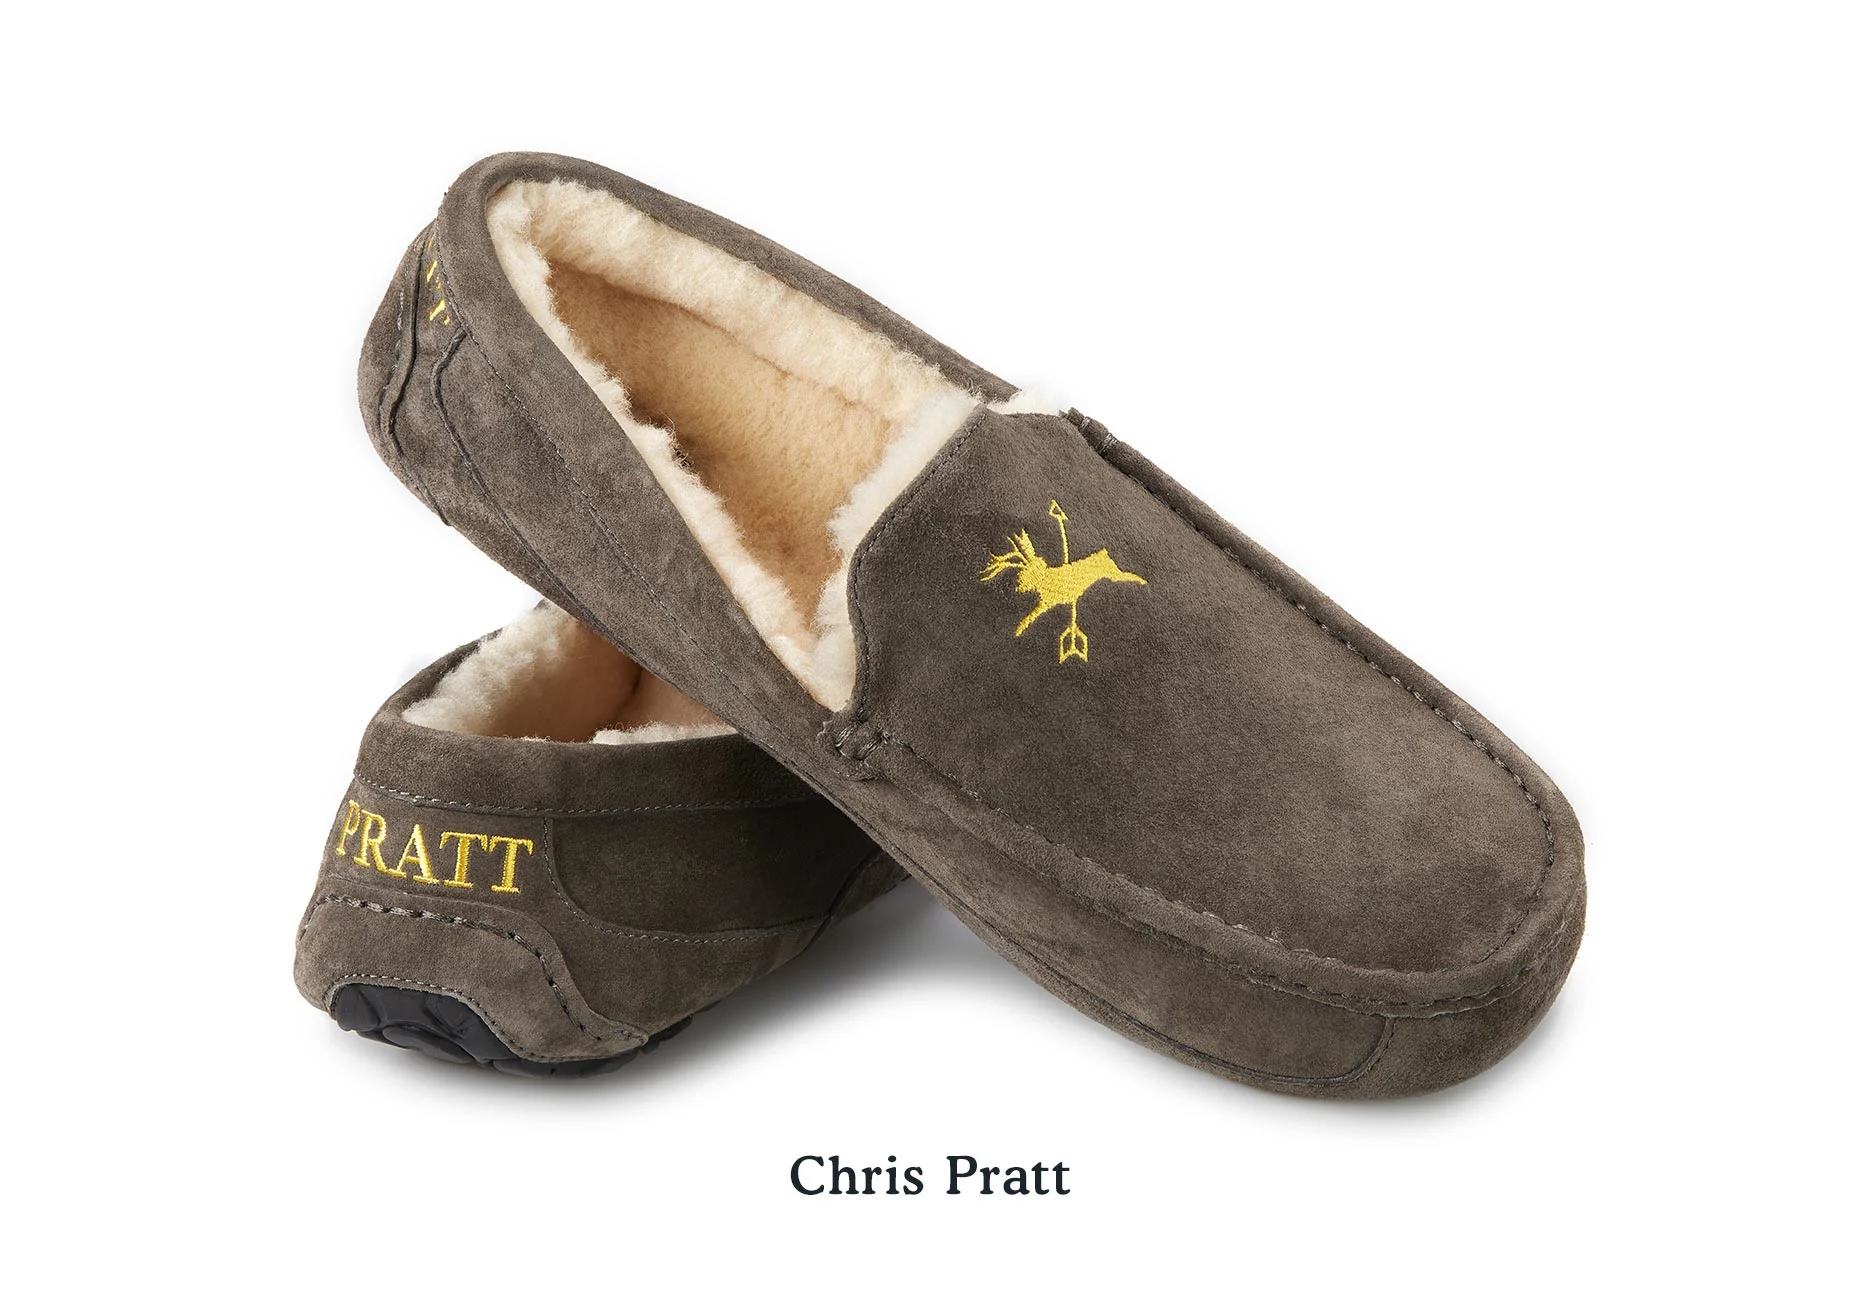 A pair of UGG Slippers for Chris Pratt with embroidery of a deer crossed with an arrow and the name "Pratt" on the heel